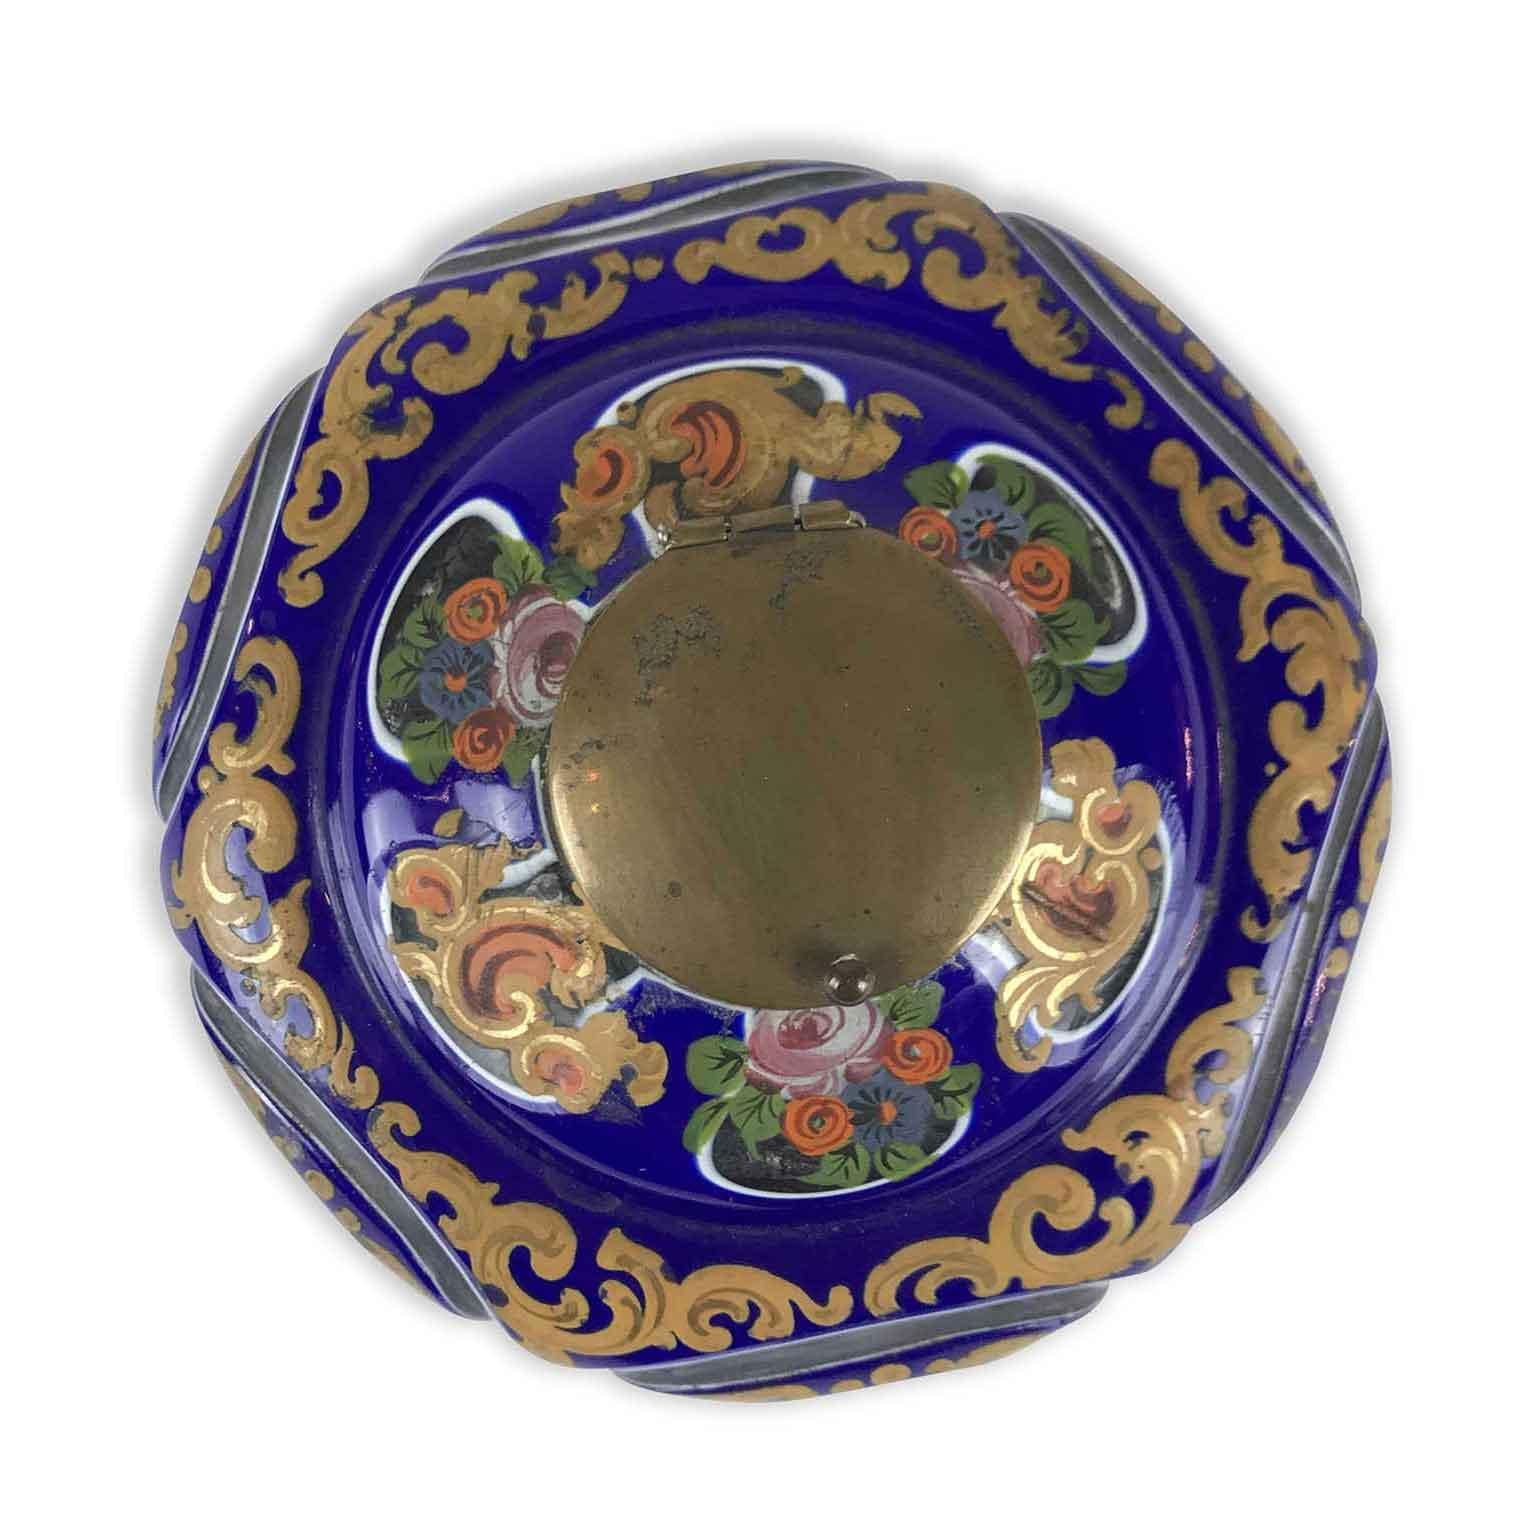 Early 19th Century Jewish Glass Ink pot dating back to the Biedermeier period, of European Austro-Hungarian origin. Circular shape, this clear jacketed glass inkwell  has a blue and white layers and is fully decorated with lovely green vegetal